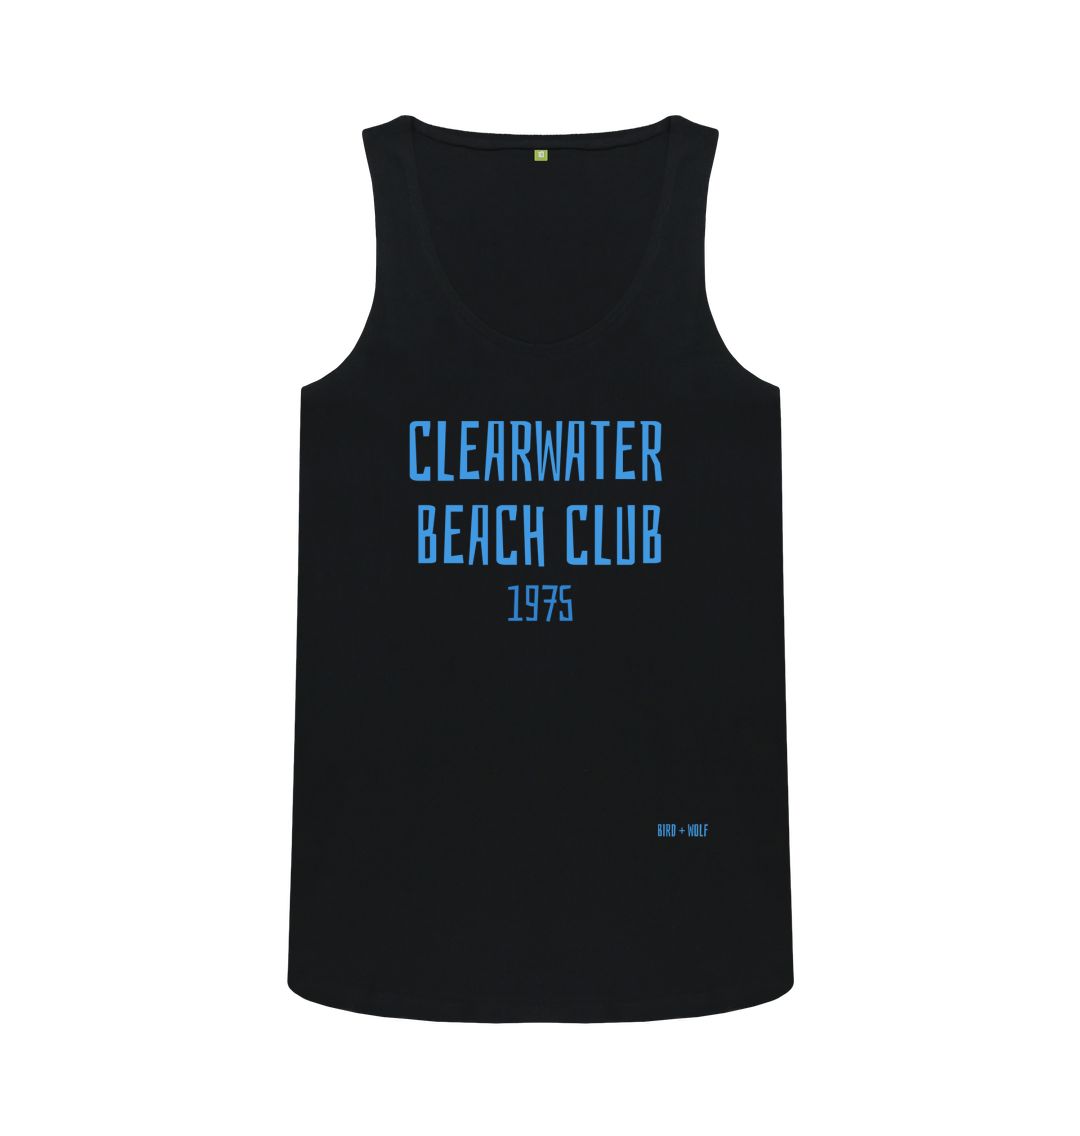 Black Clearwater Beach Club 1975 Fitted Vest